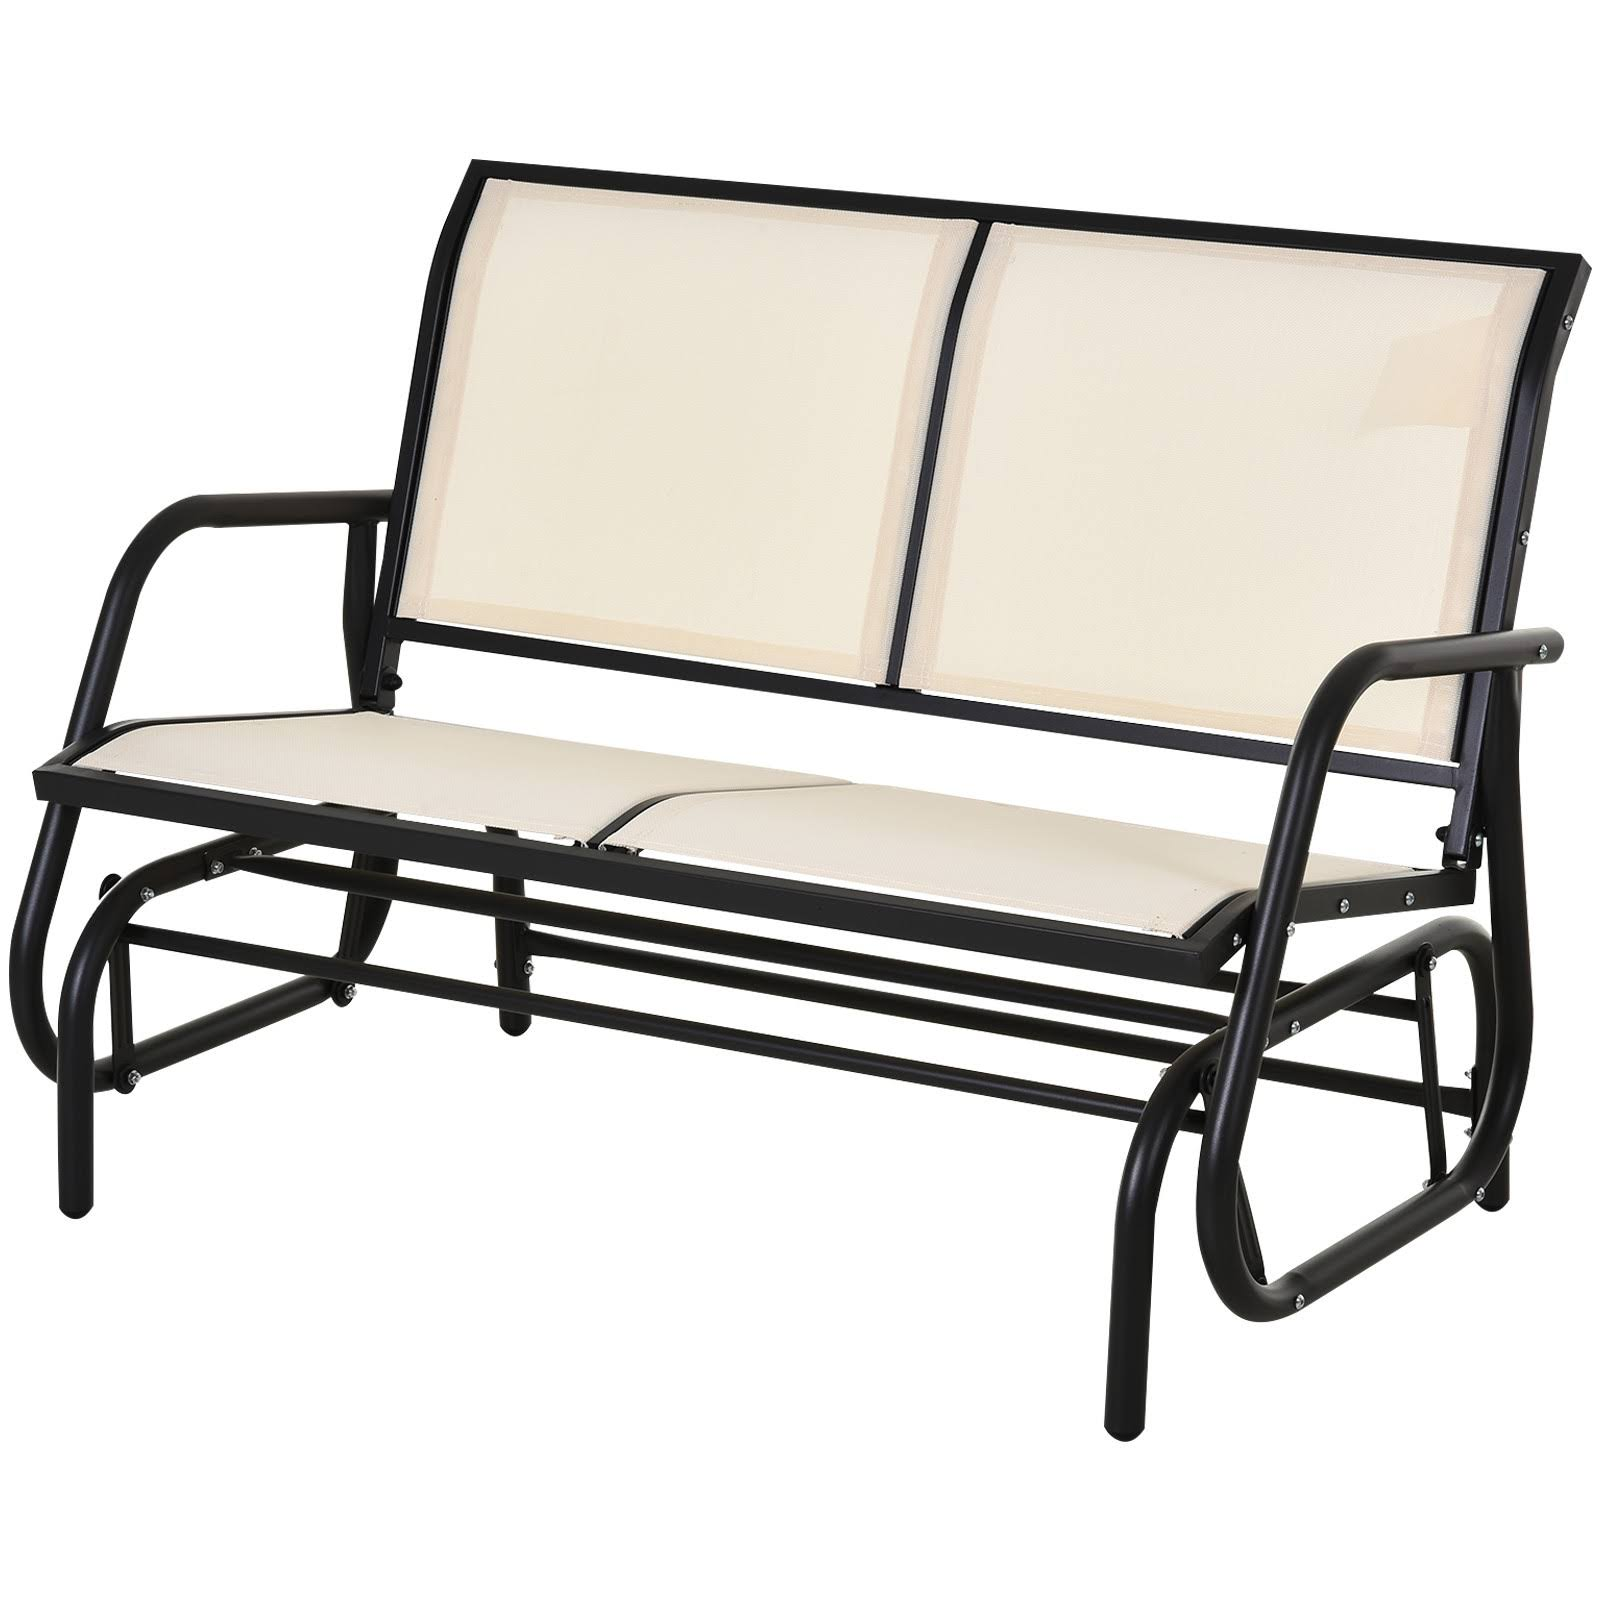 Outsunny 2-Person Steel and Mesh Sling Patio Glider Swing Chair  C Cream White